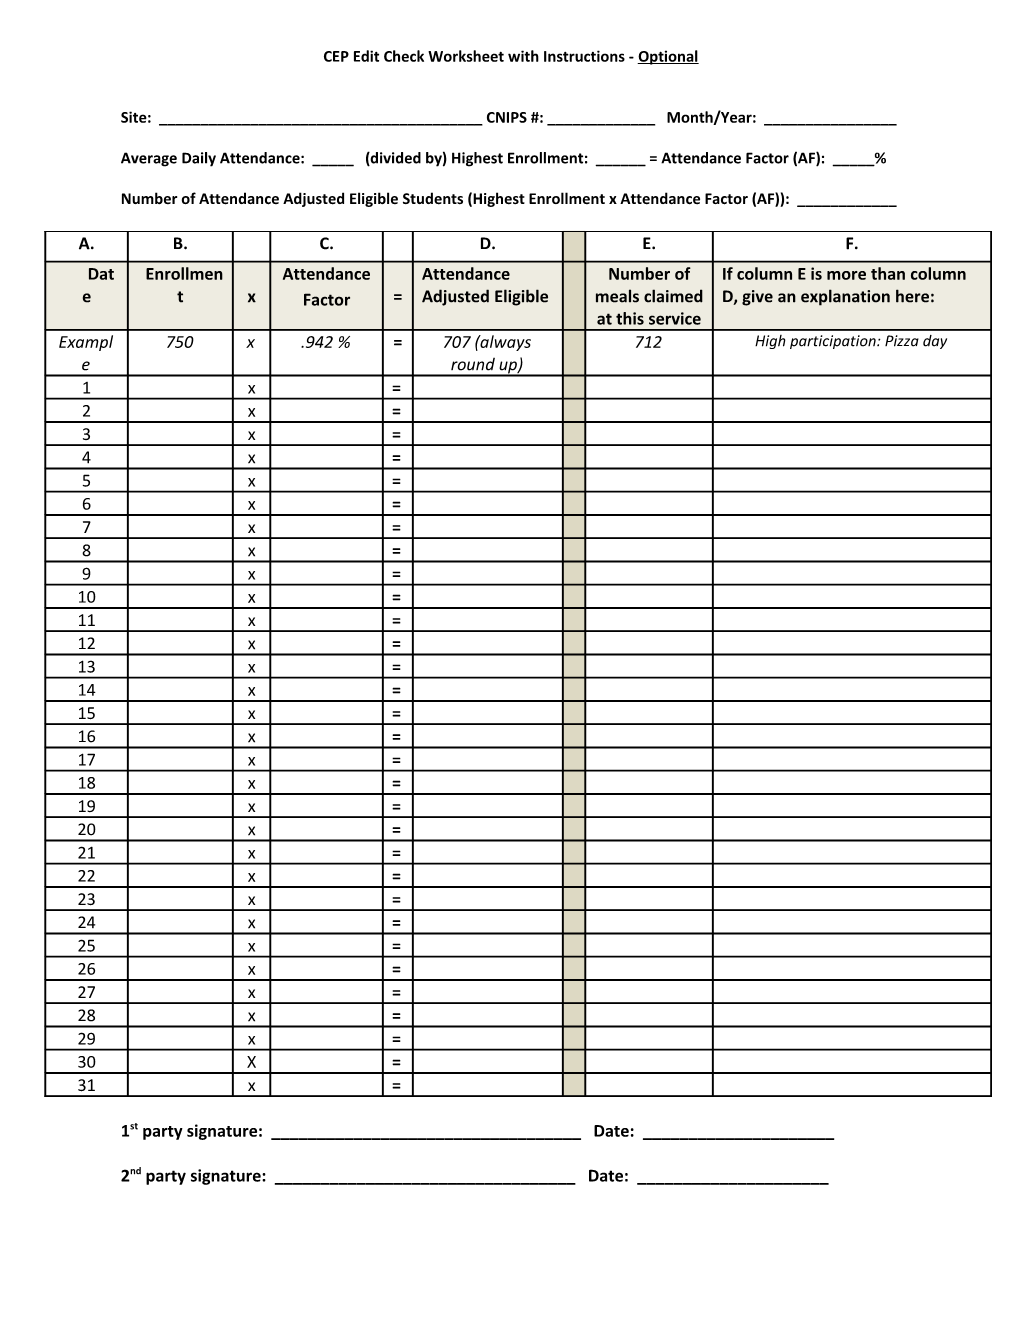 CEP Edit Check Worksheet with Instructions - Optional